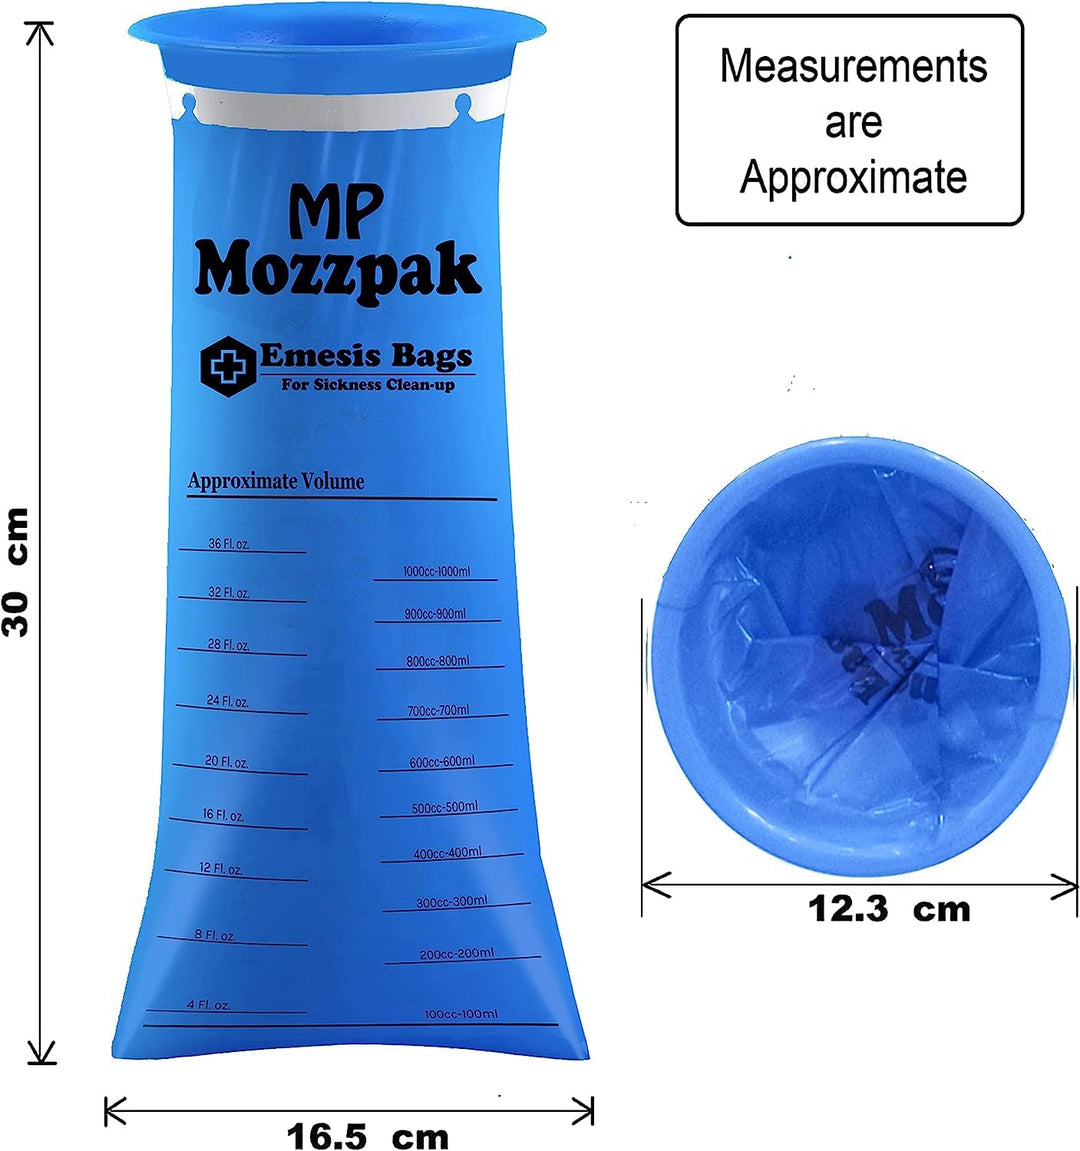 MP MOZZPAK Vomit Bags Disposable – 35 Pack – 1000ml Barf Bags – Leak Resistant, Medical Grade, Portable Emesis Bags, Puke, Throw Up, Nausea Bags for Travel Motion Sickness, Car & Aircraft, Kids, Taxi